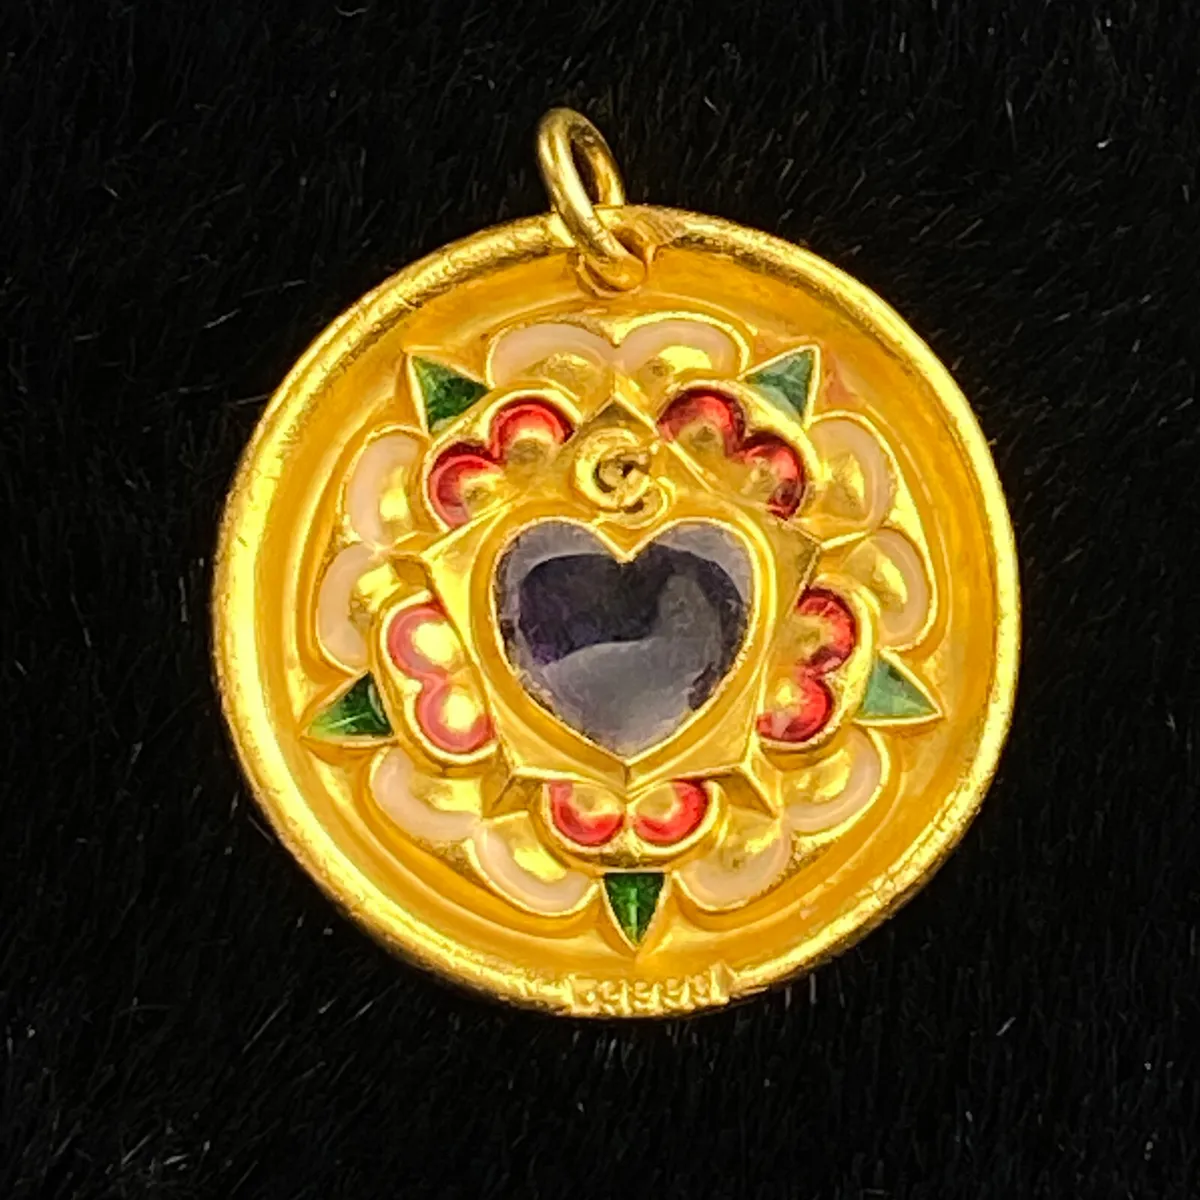 Owsley Stanley 24k Gold Enamel Grateful Dead Steal Your Face 22mm Pendant  Chain